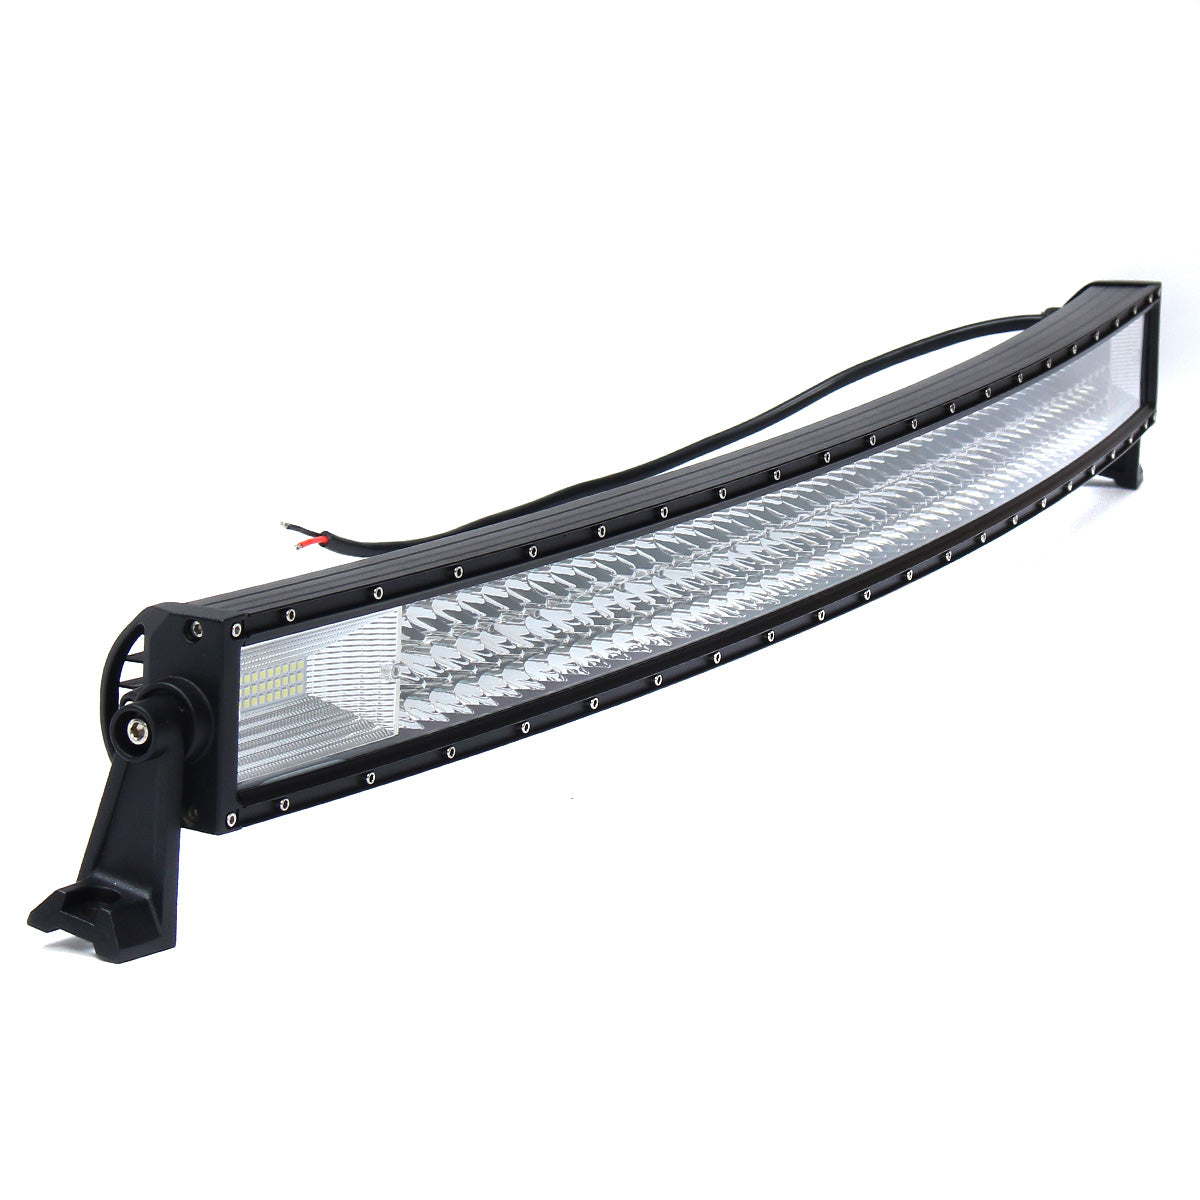 Gray 42Inch 7D LED Work Light Bars TRI-ROW Curved Combo Beam 594W 59400LM for Off Road Boat Truck SUV